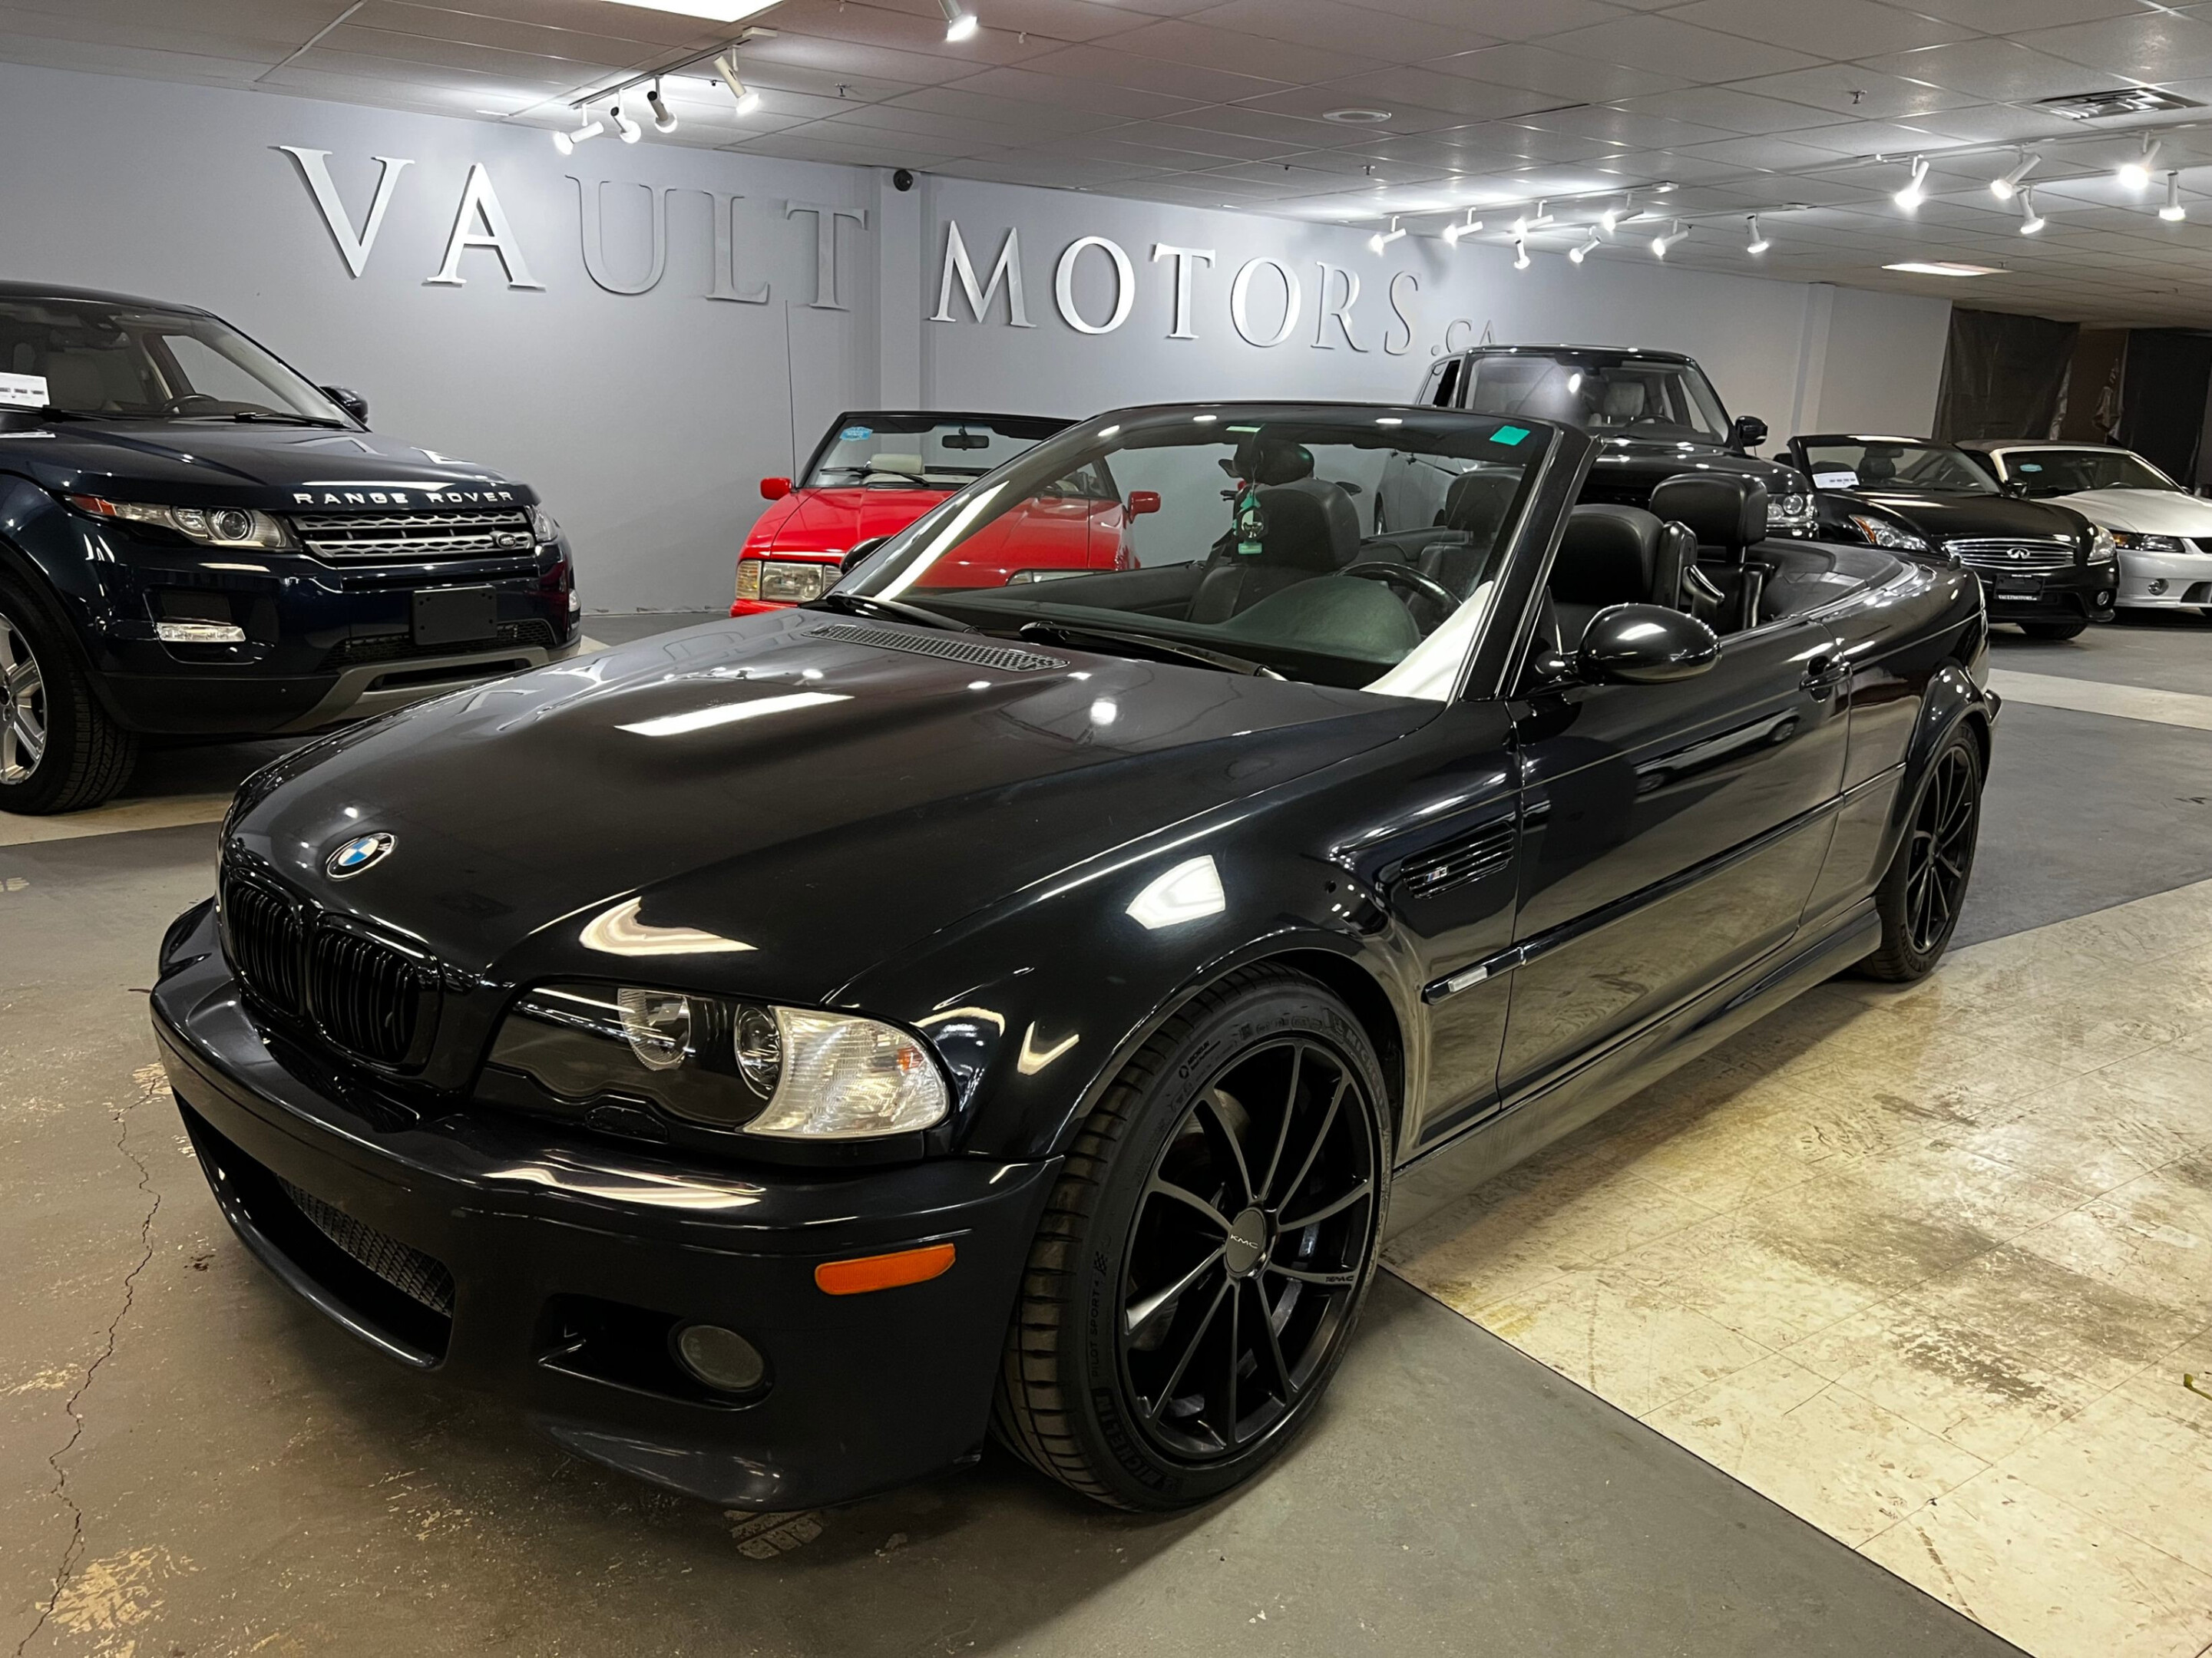 2002 BMW M3 2dr Cabriolet - 27 SERVICE RECORDS | Selling AS IS